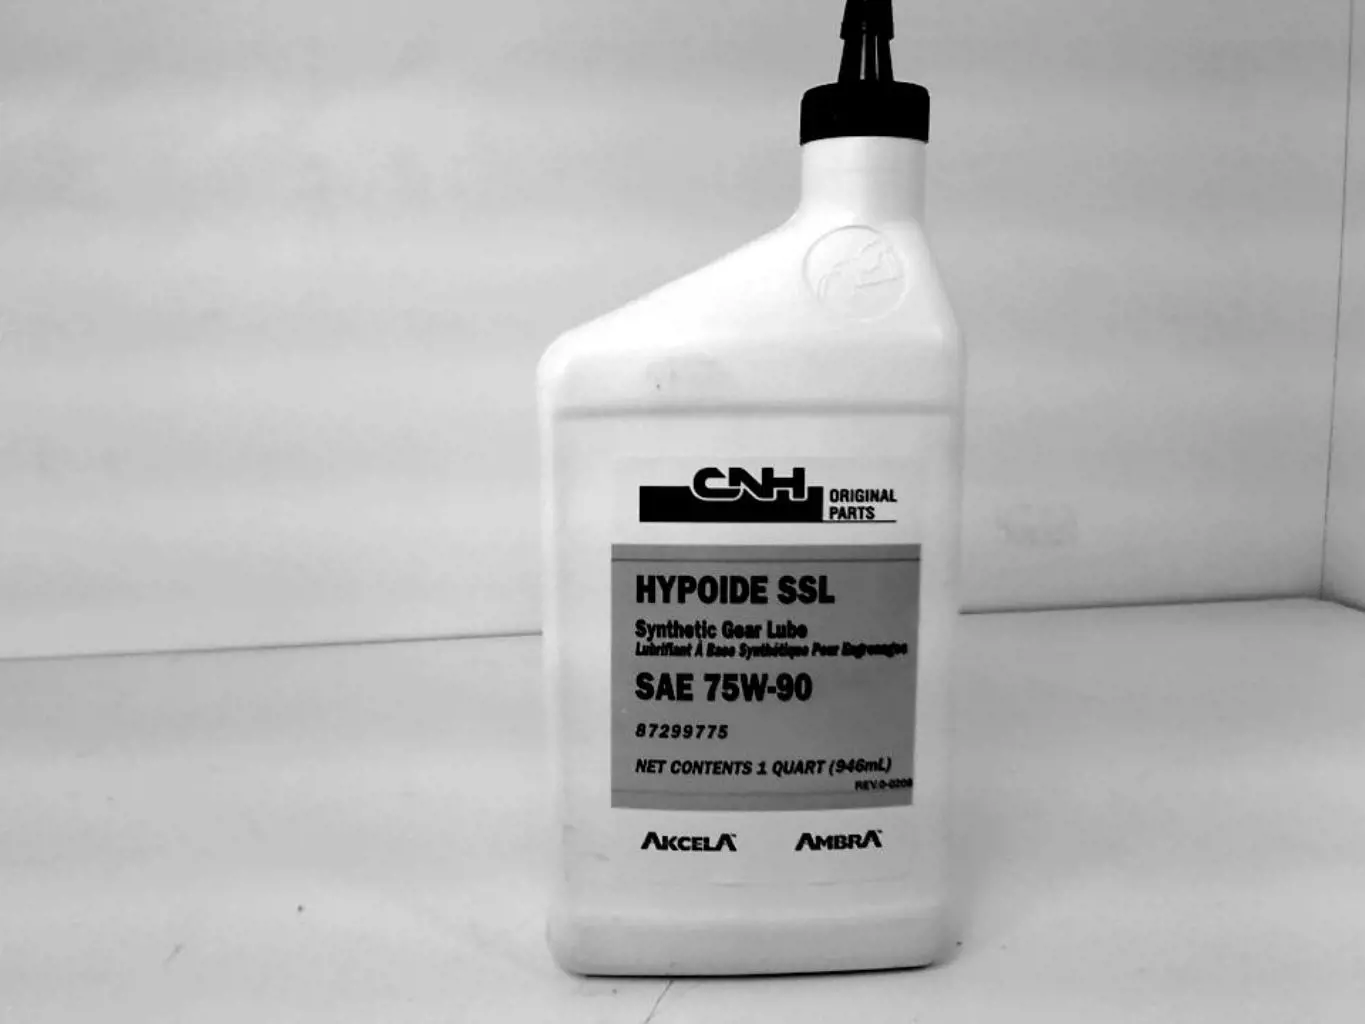 Image 1 for #87299775 Synthetic Hypoide Gear Oil EP SAE 75W-90